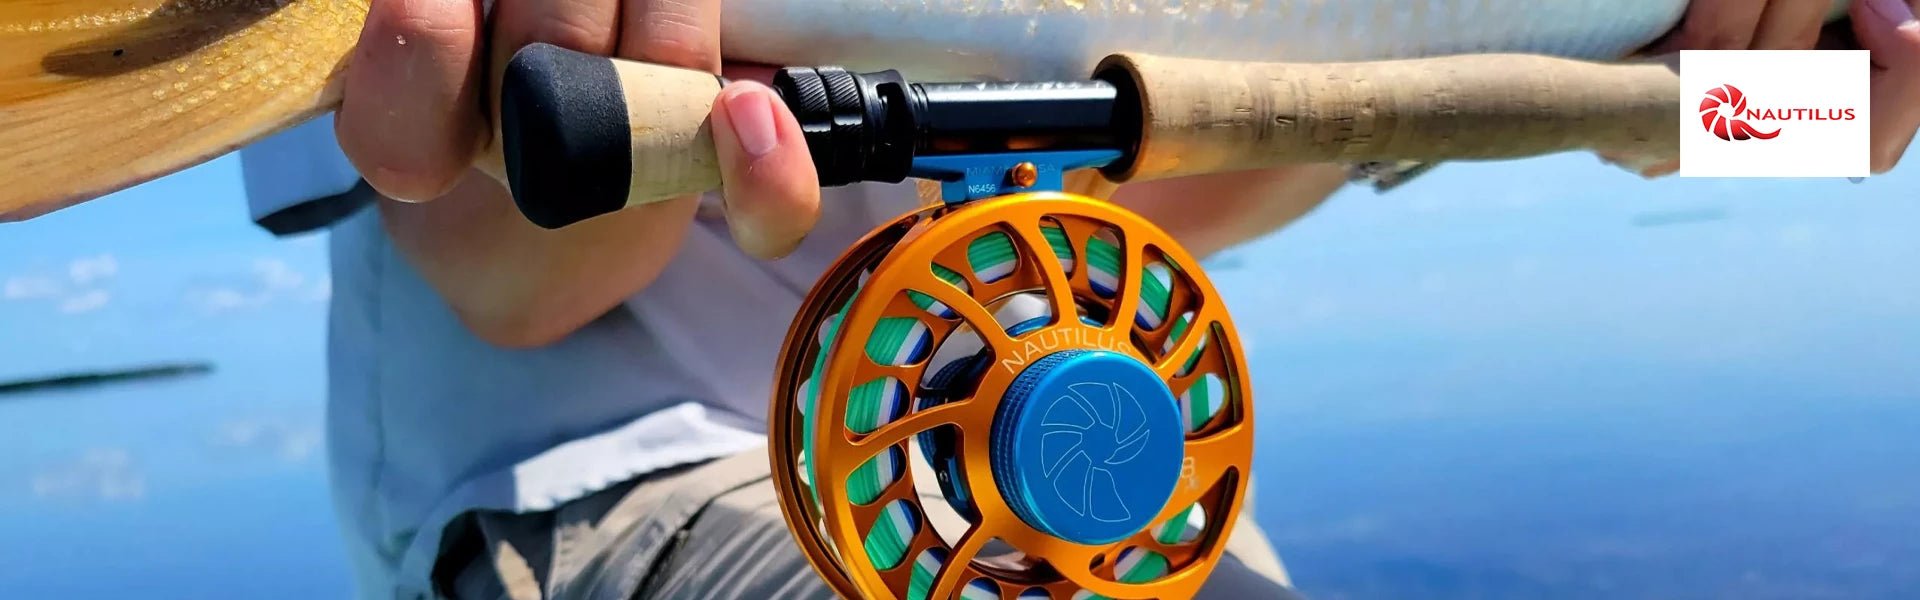 Nautilus Fly Reels - Smooth & Reliable Reels